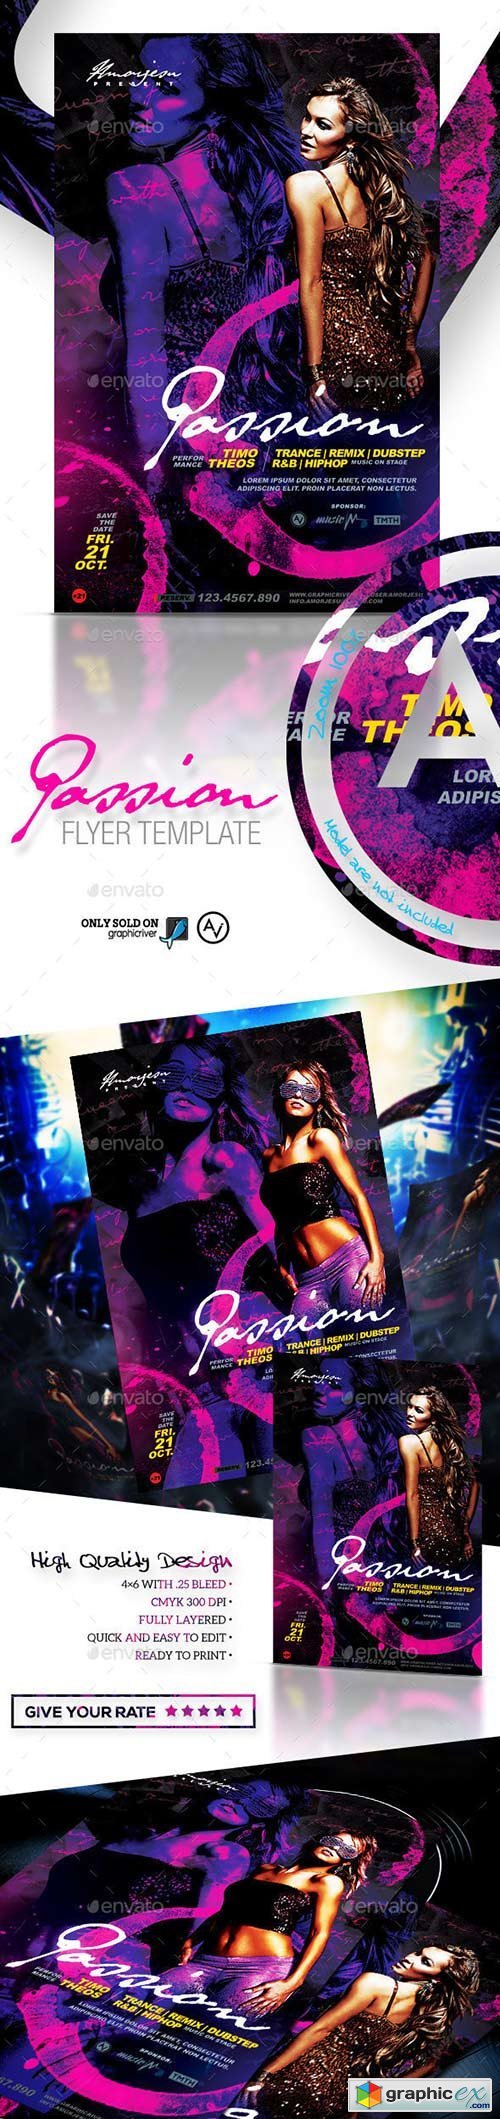 Passion Flyer Template